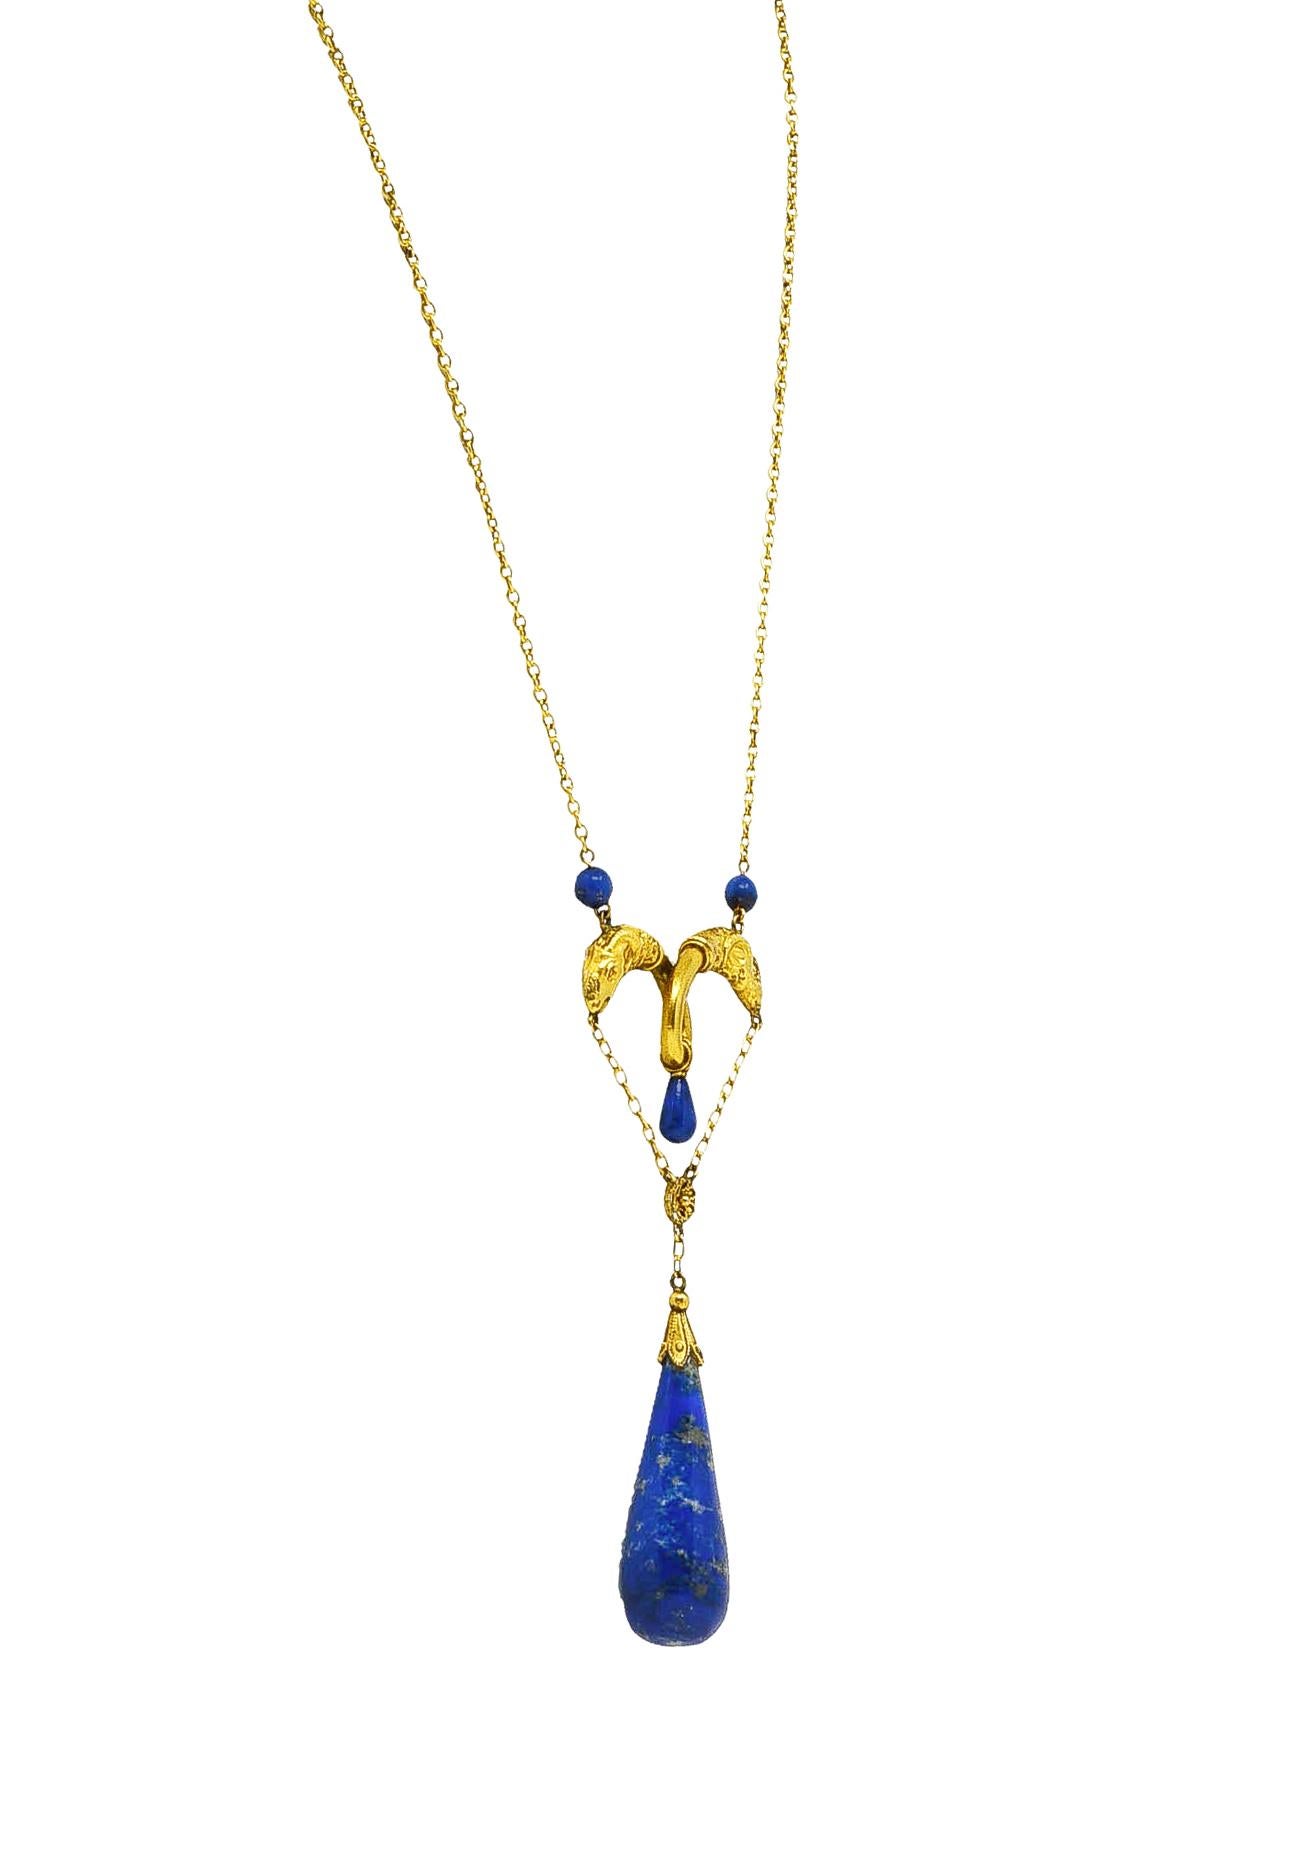 Bead Victorian Etruscan Revival Lapis Lazuli 14 Karat Yellow Gold Swagged Necklace For Sale